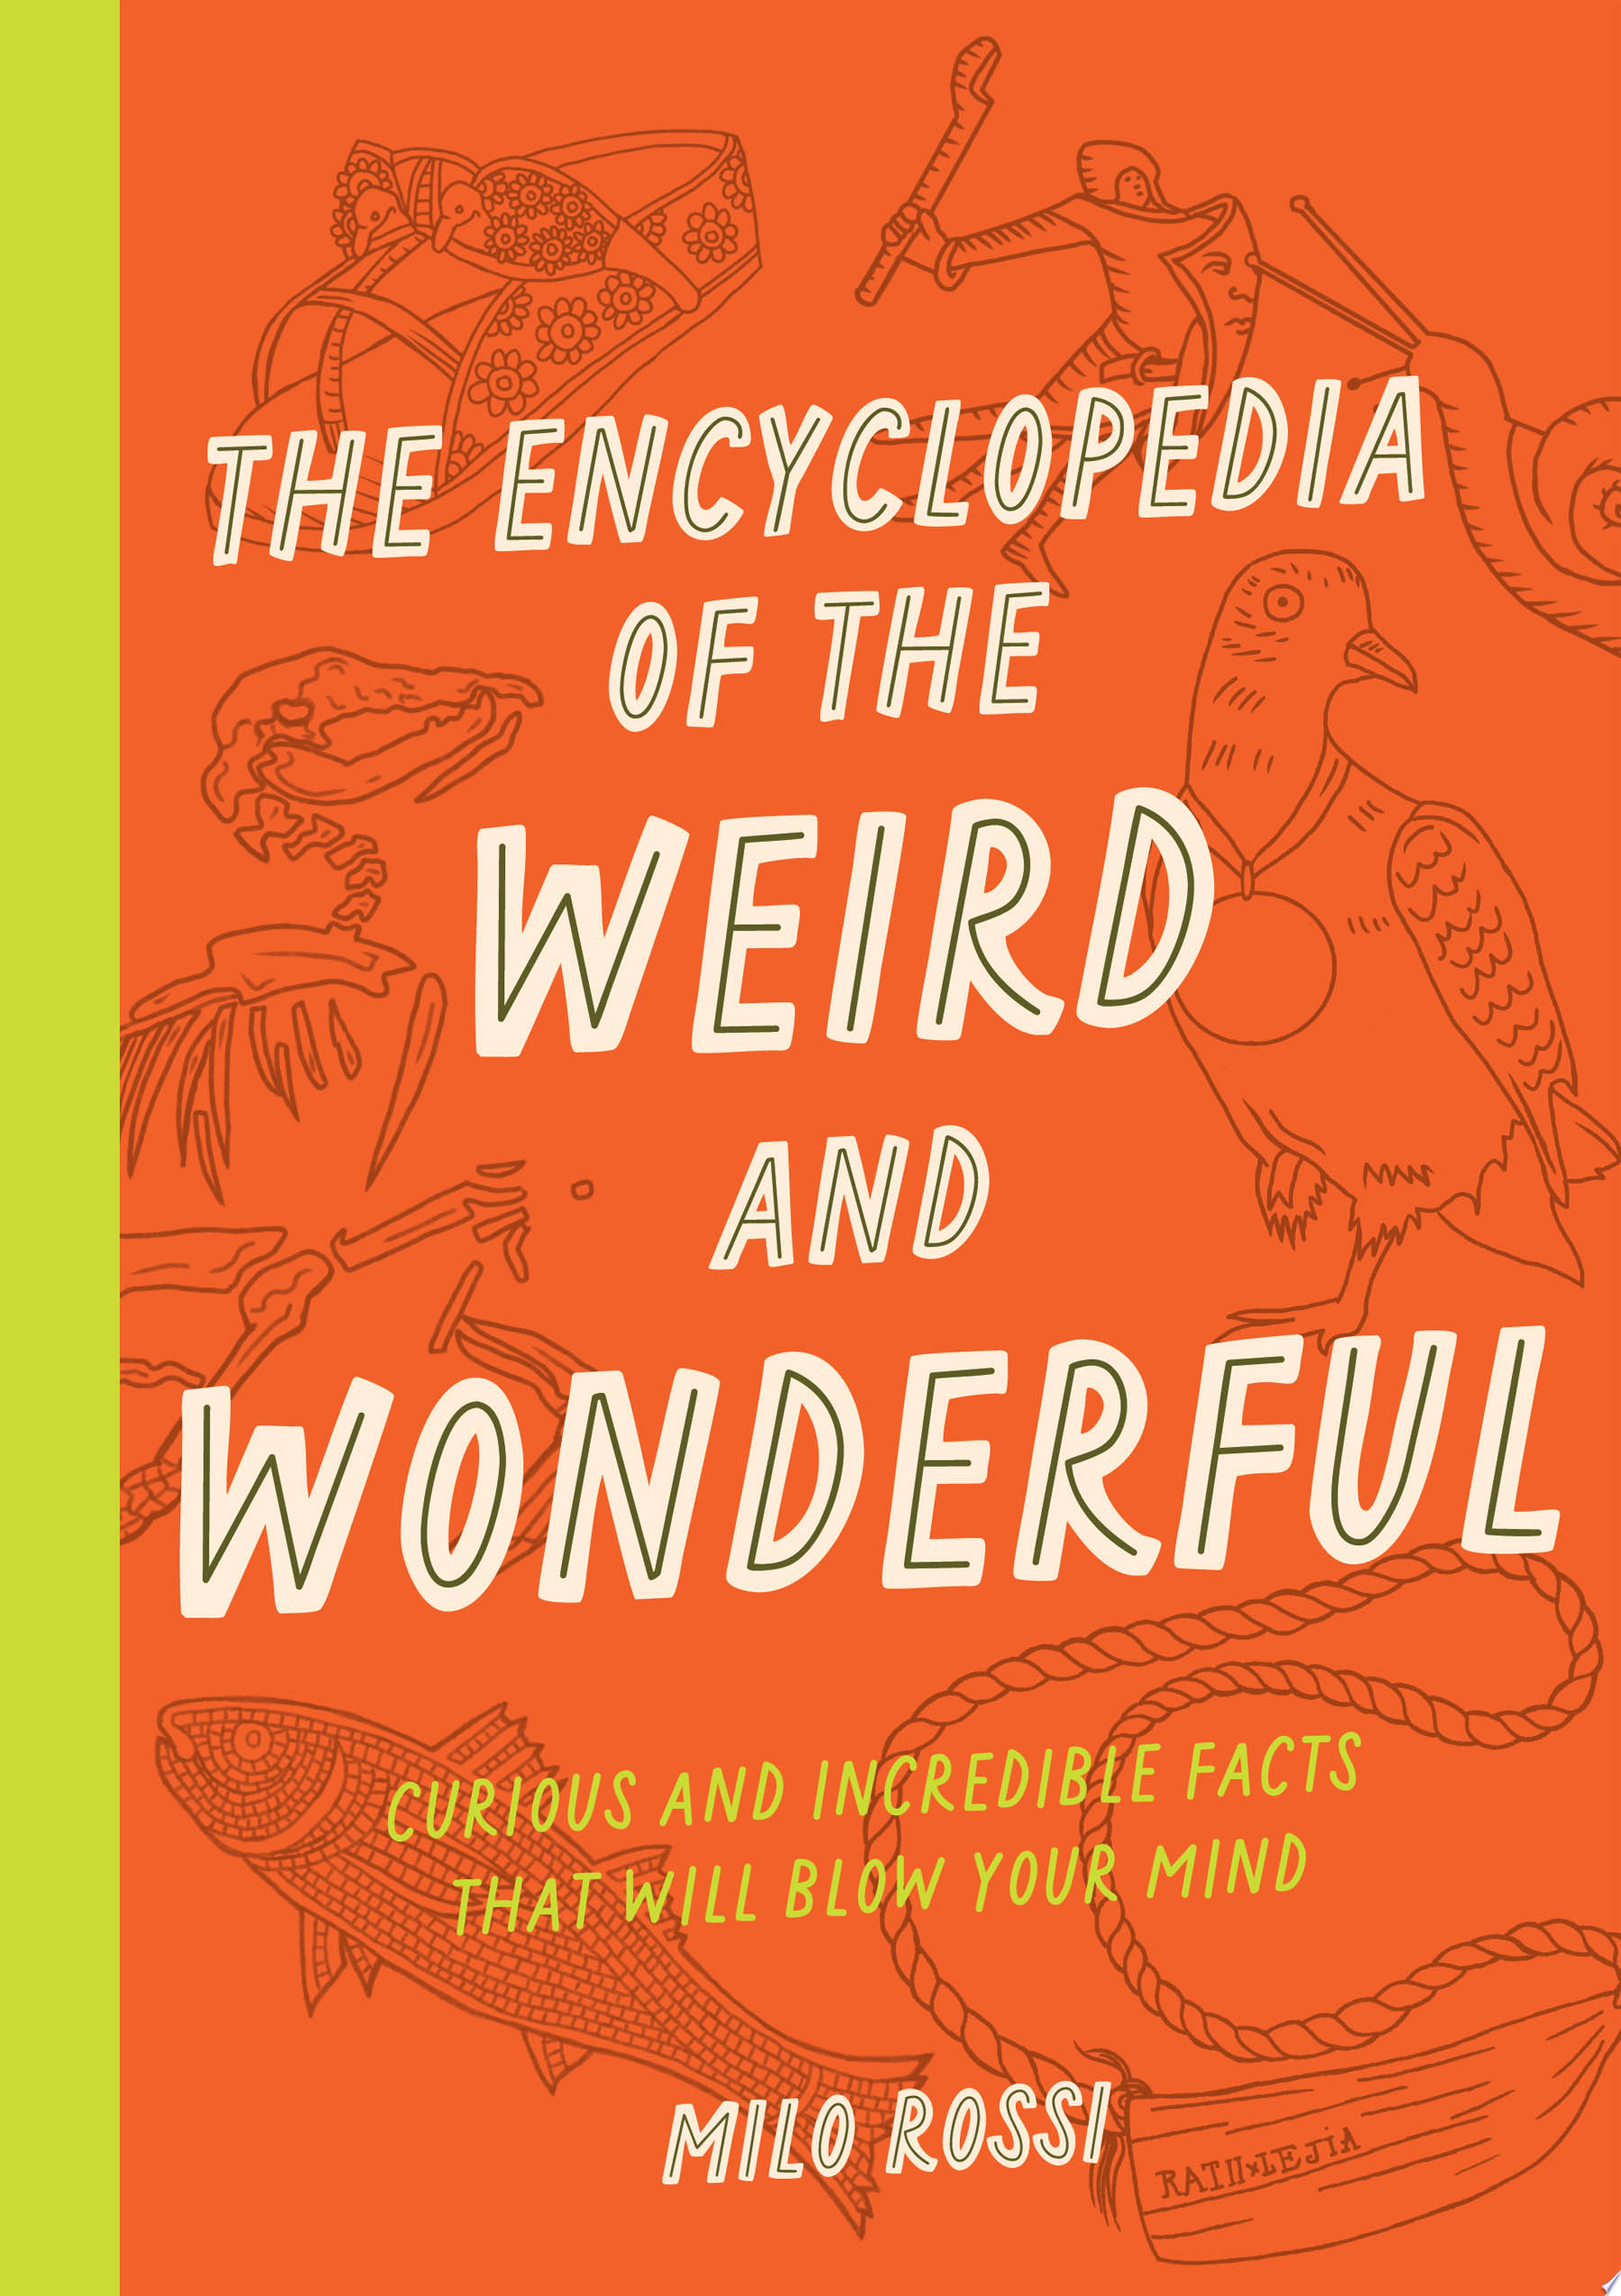 Image for "The Encyclopedia of the Weird and Wonderful"